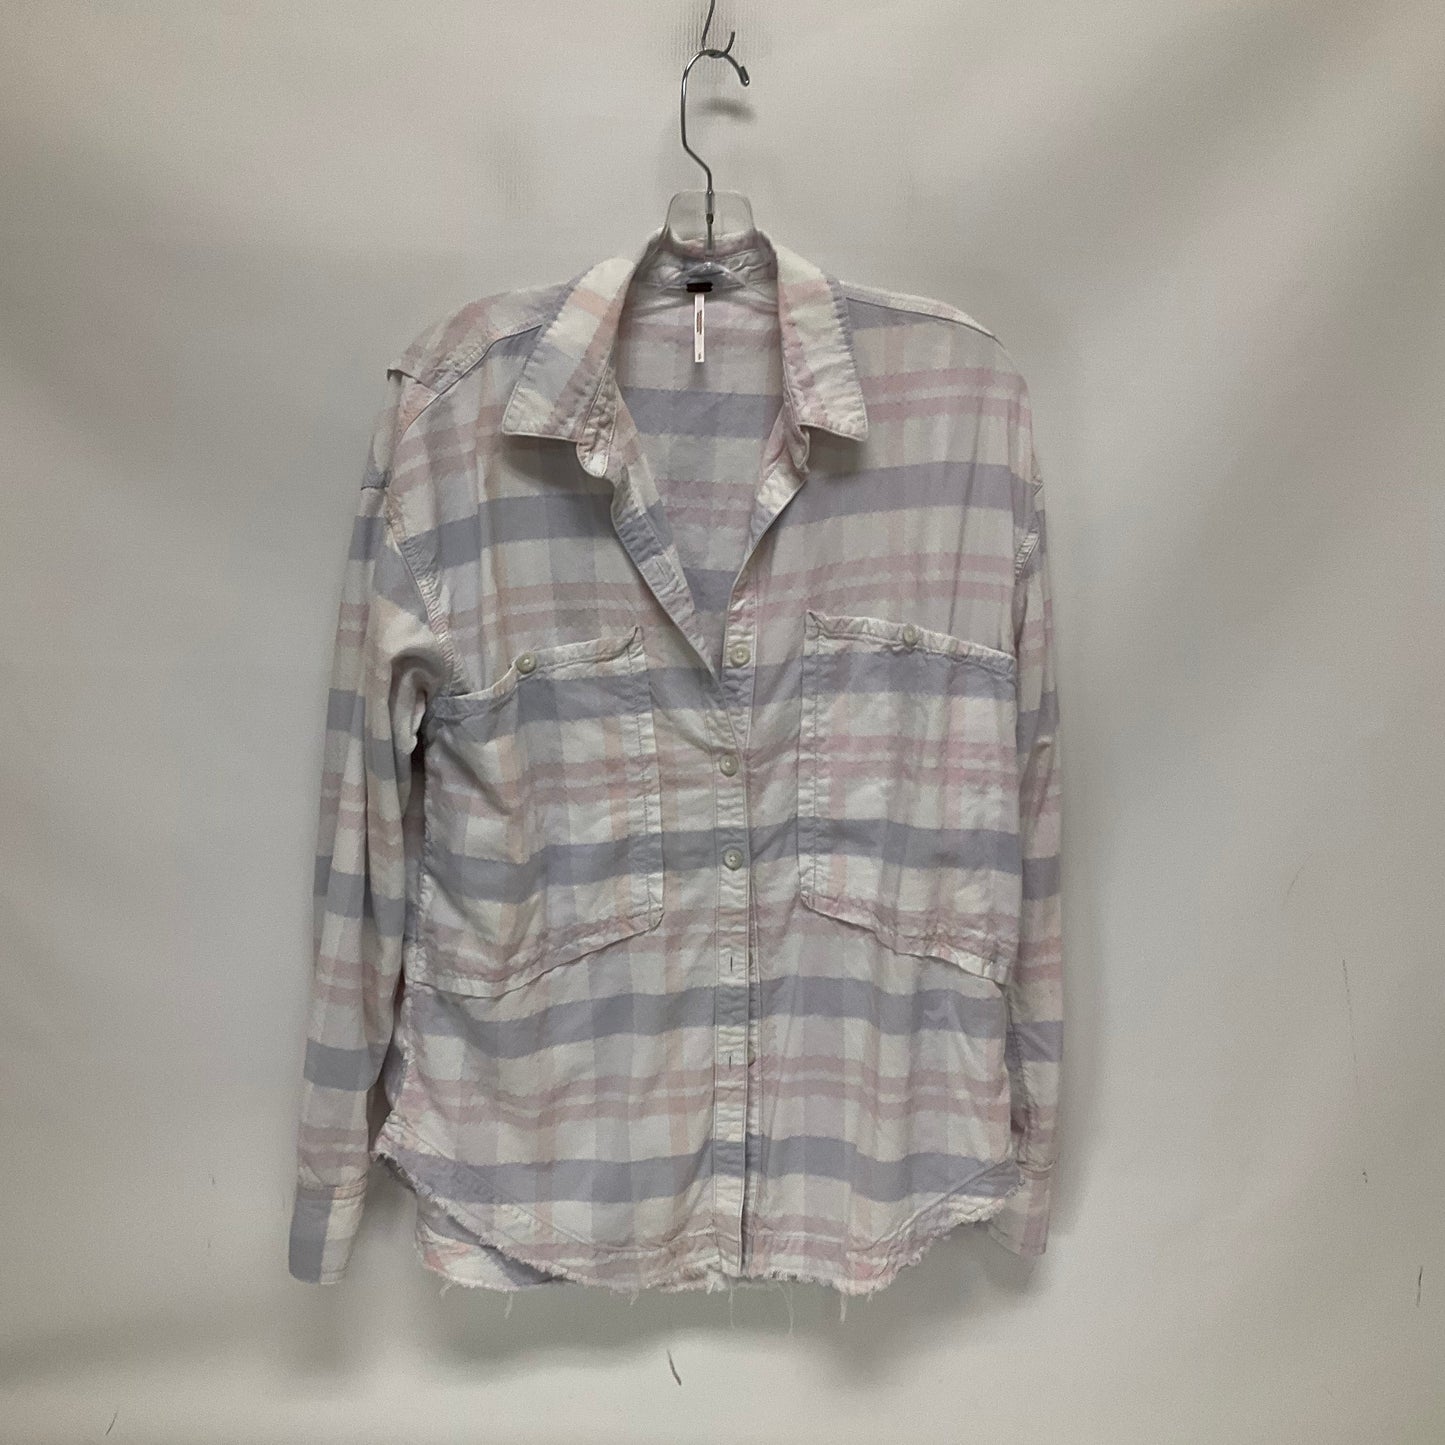 Plaid Pattern Top Long Sleeve Free People, Size S